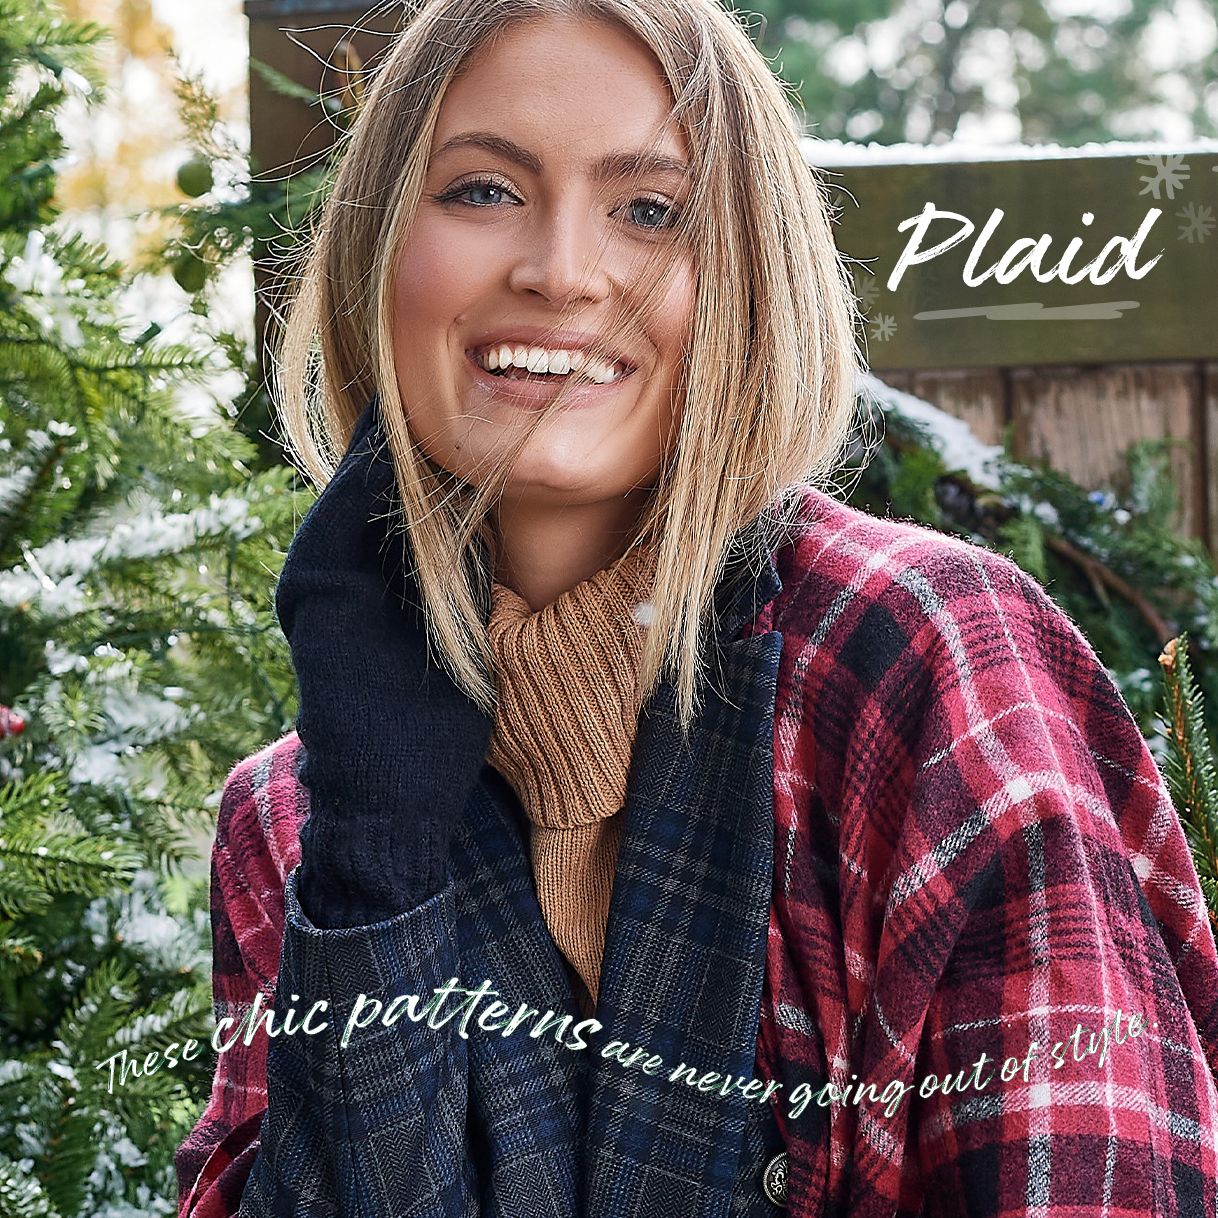 Plaid Styles  These chic patterns are never going out of style.